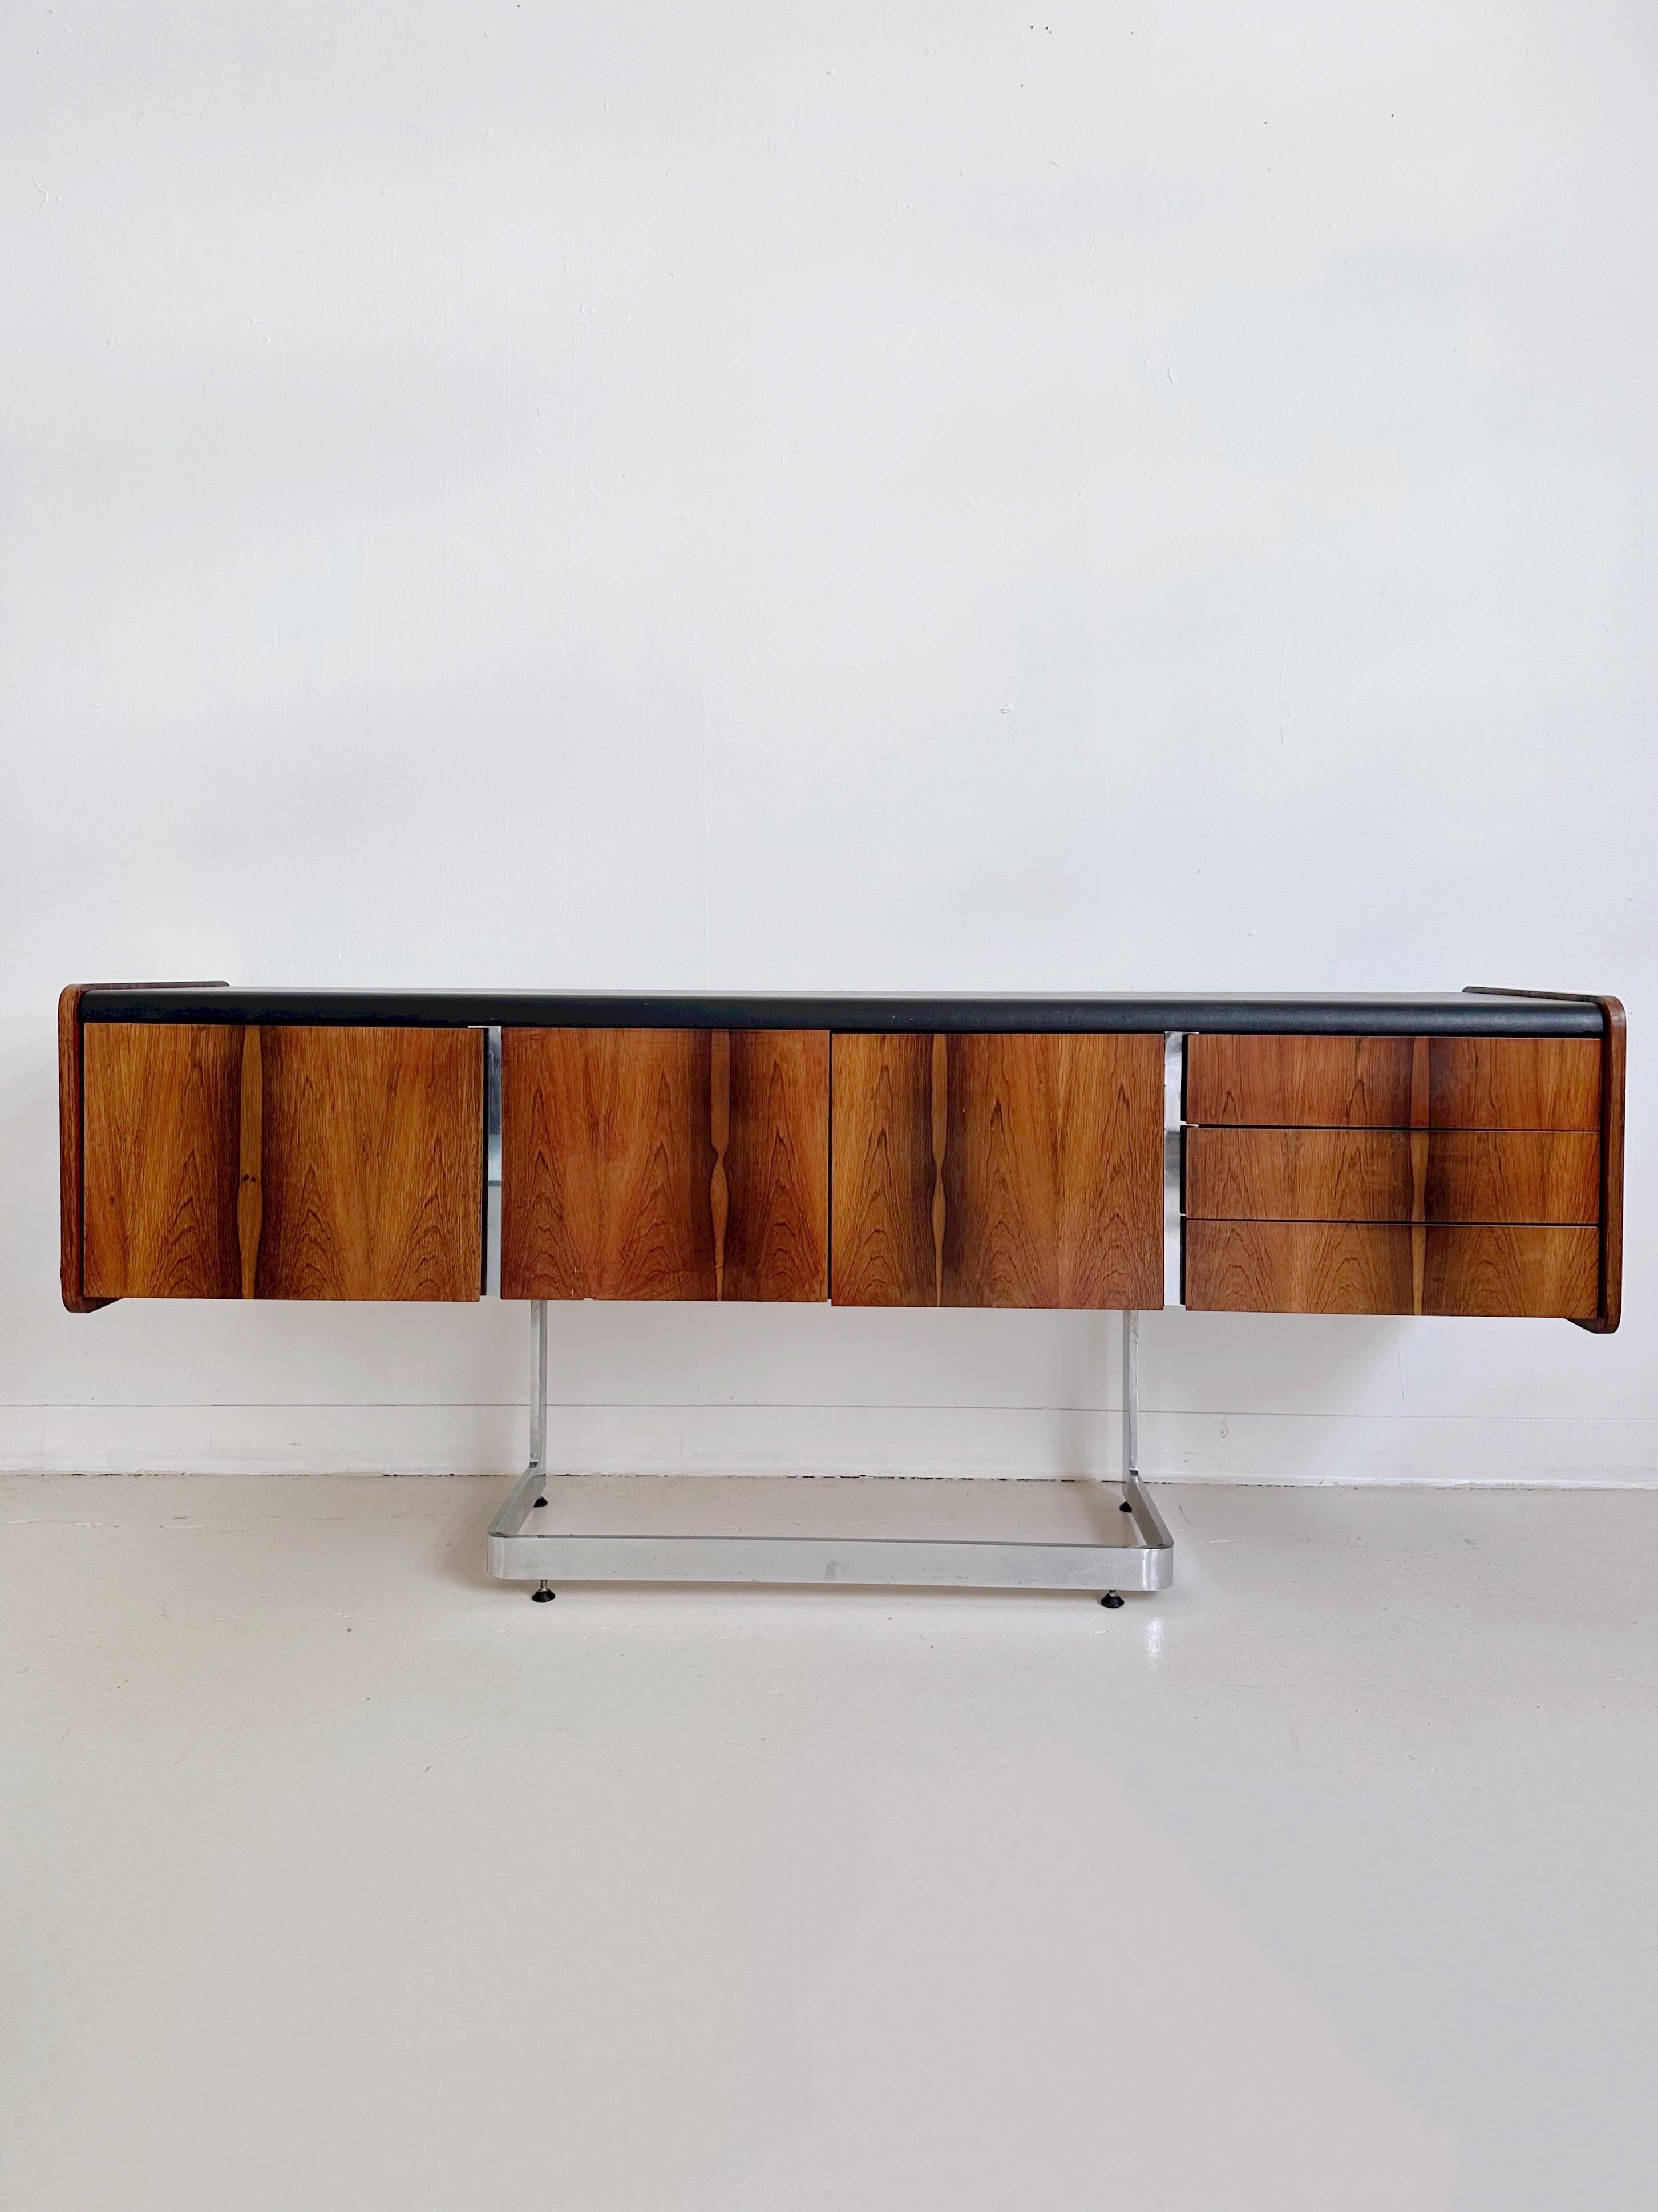 Rosewood Credenza with Cantilevered Chrome Base and Black Leatherette Top by Ste Marie & Laurent, 70s

Features a deep file drawer, three pullout drawers and a centre storage cabinet.


*Very good condition, one very small dent and scratch at the